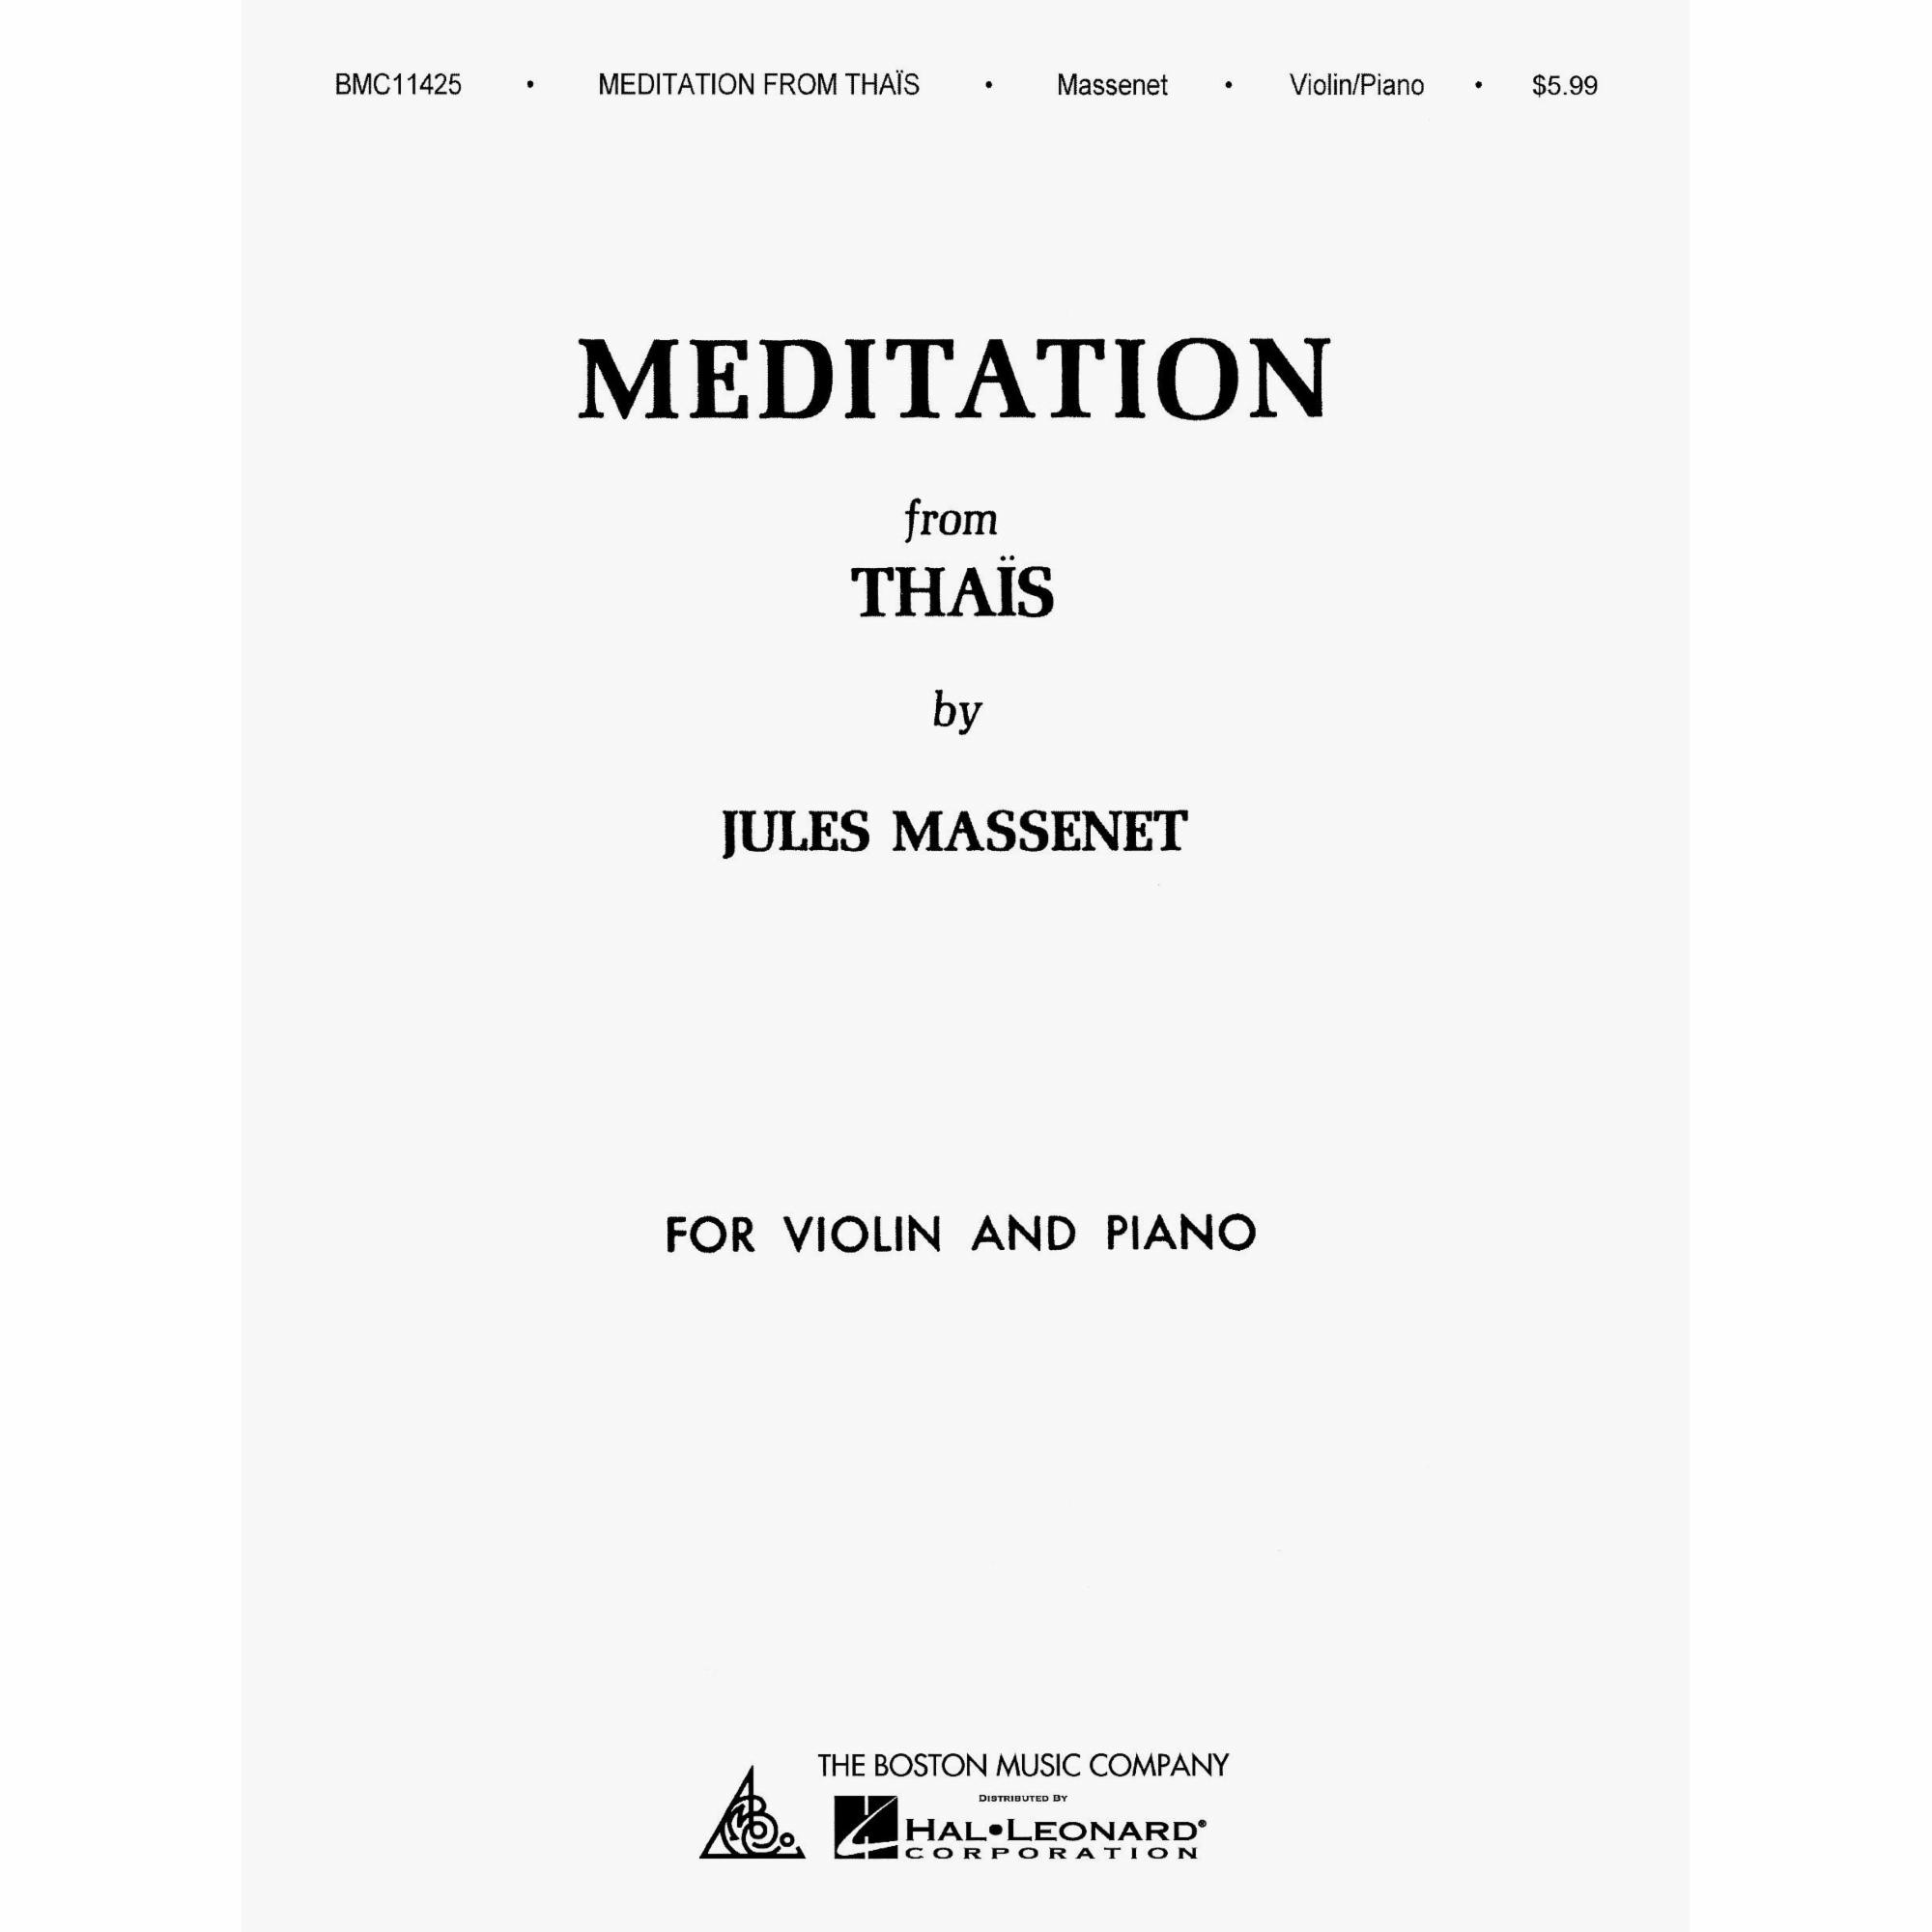 Massenet -- Meditation, from Thais for Violin and Piano